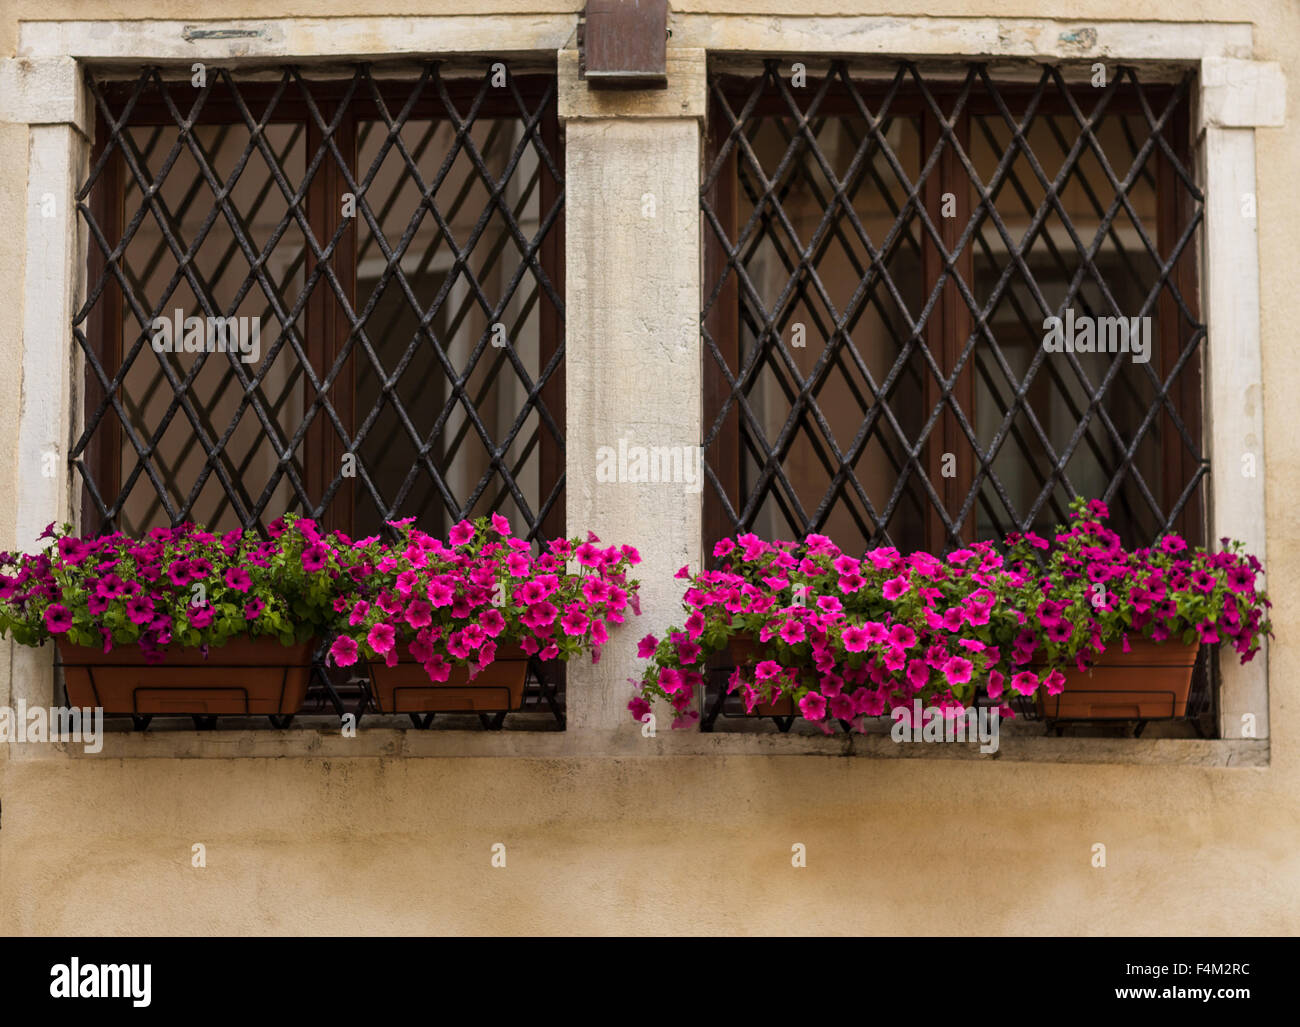 Window boxes with pink flowers against black railings in Venice Stock Photo